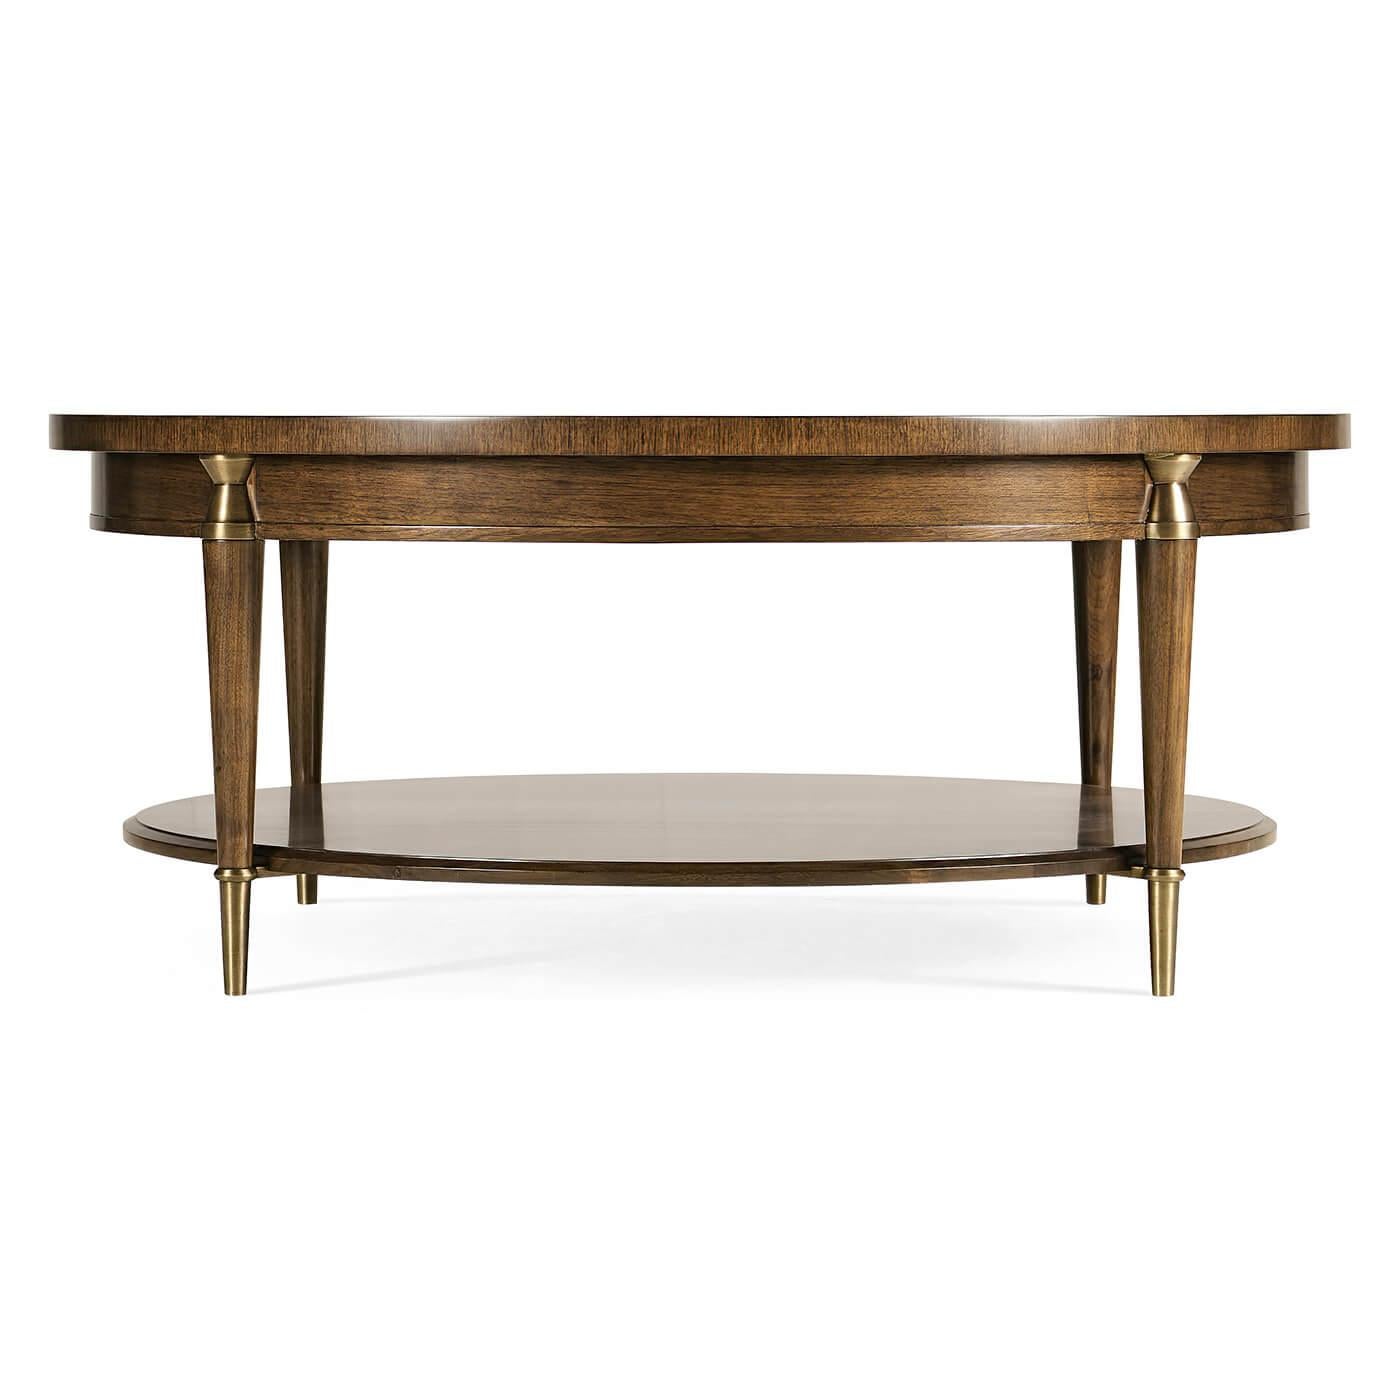 Mid-Century Modern round coffee table. Influenced by the work of the French Modernists, this table features figured walnut veneer, in a radial slip match pattern. Legs are solid walnut with brass hardware. Hardware is cast and acid dipped then